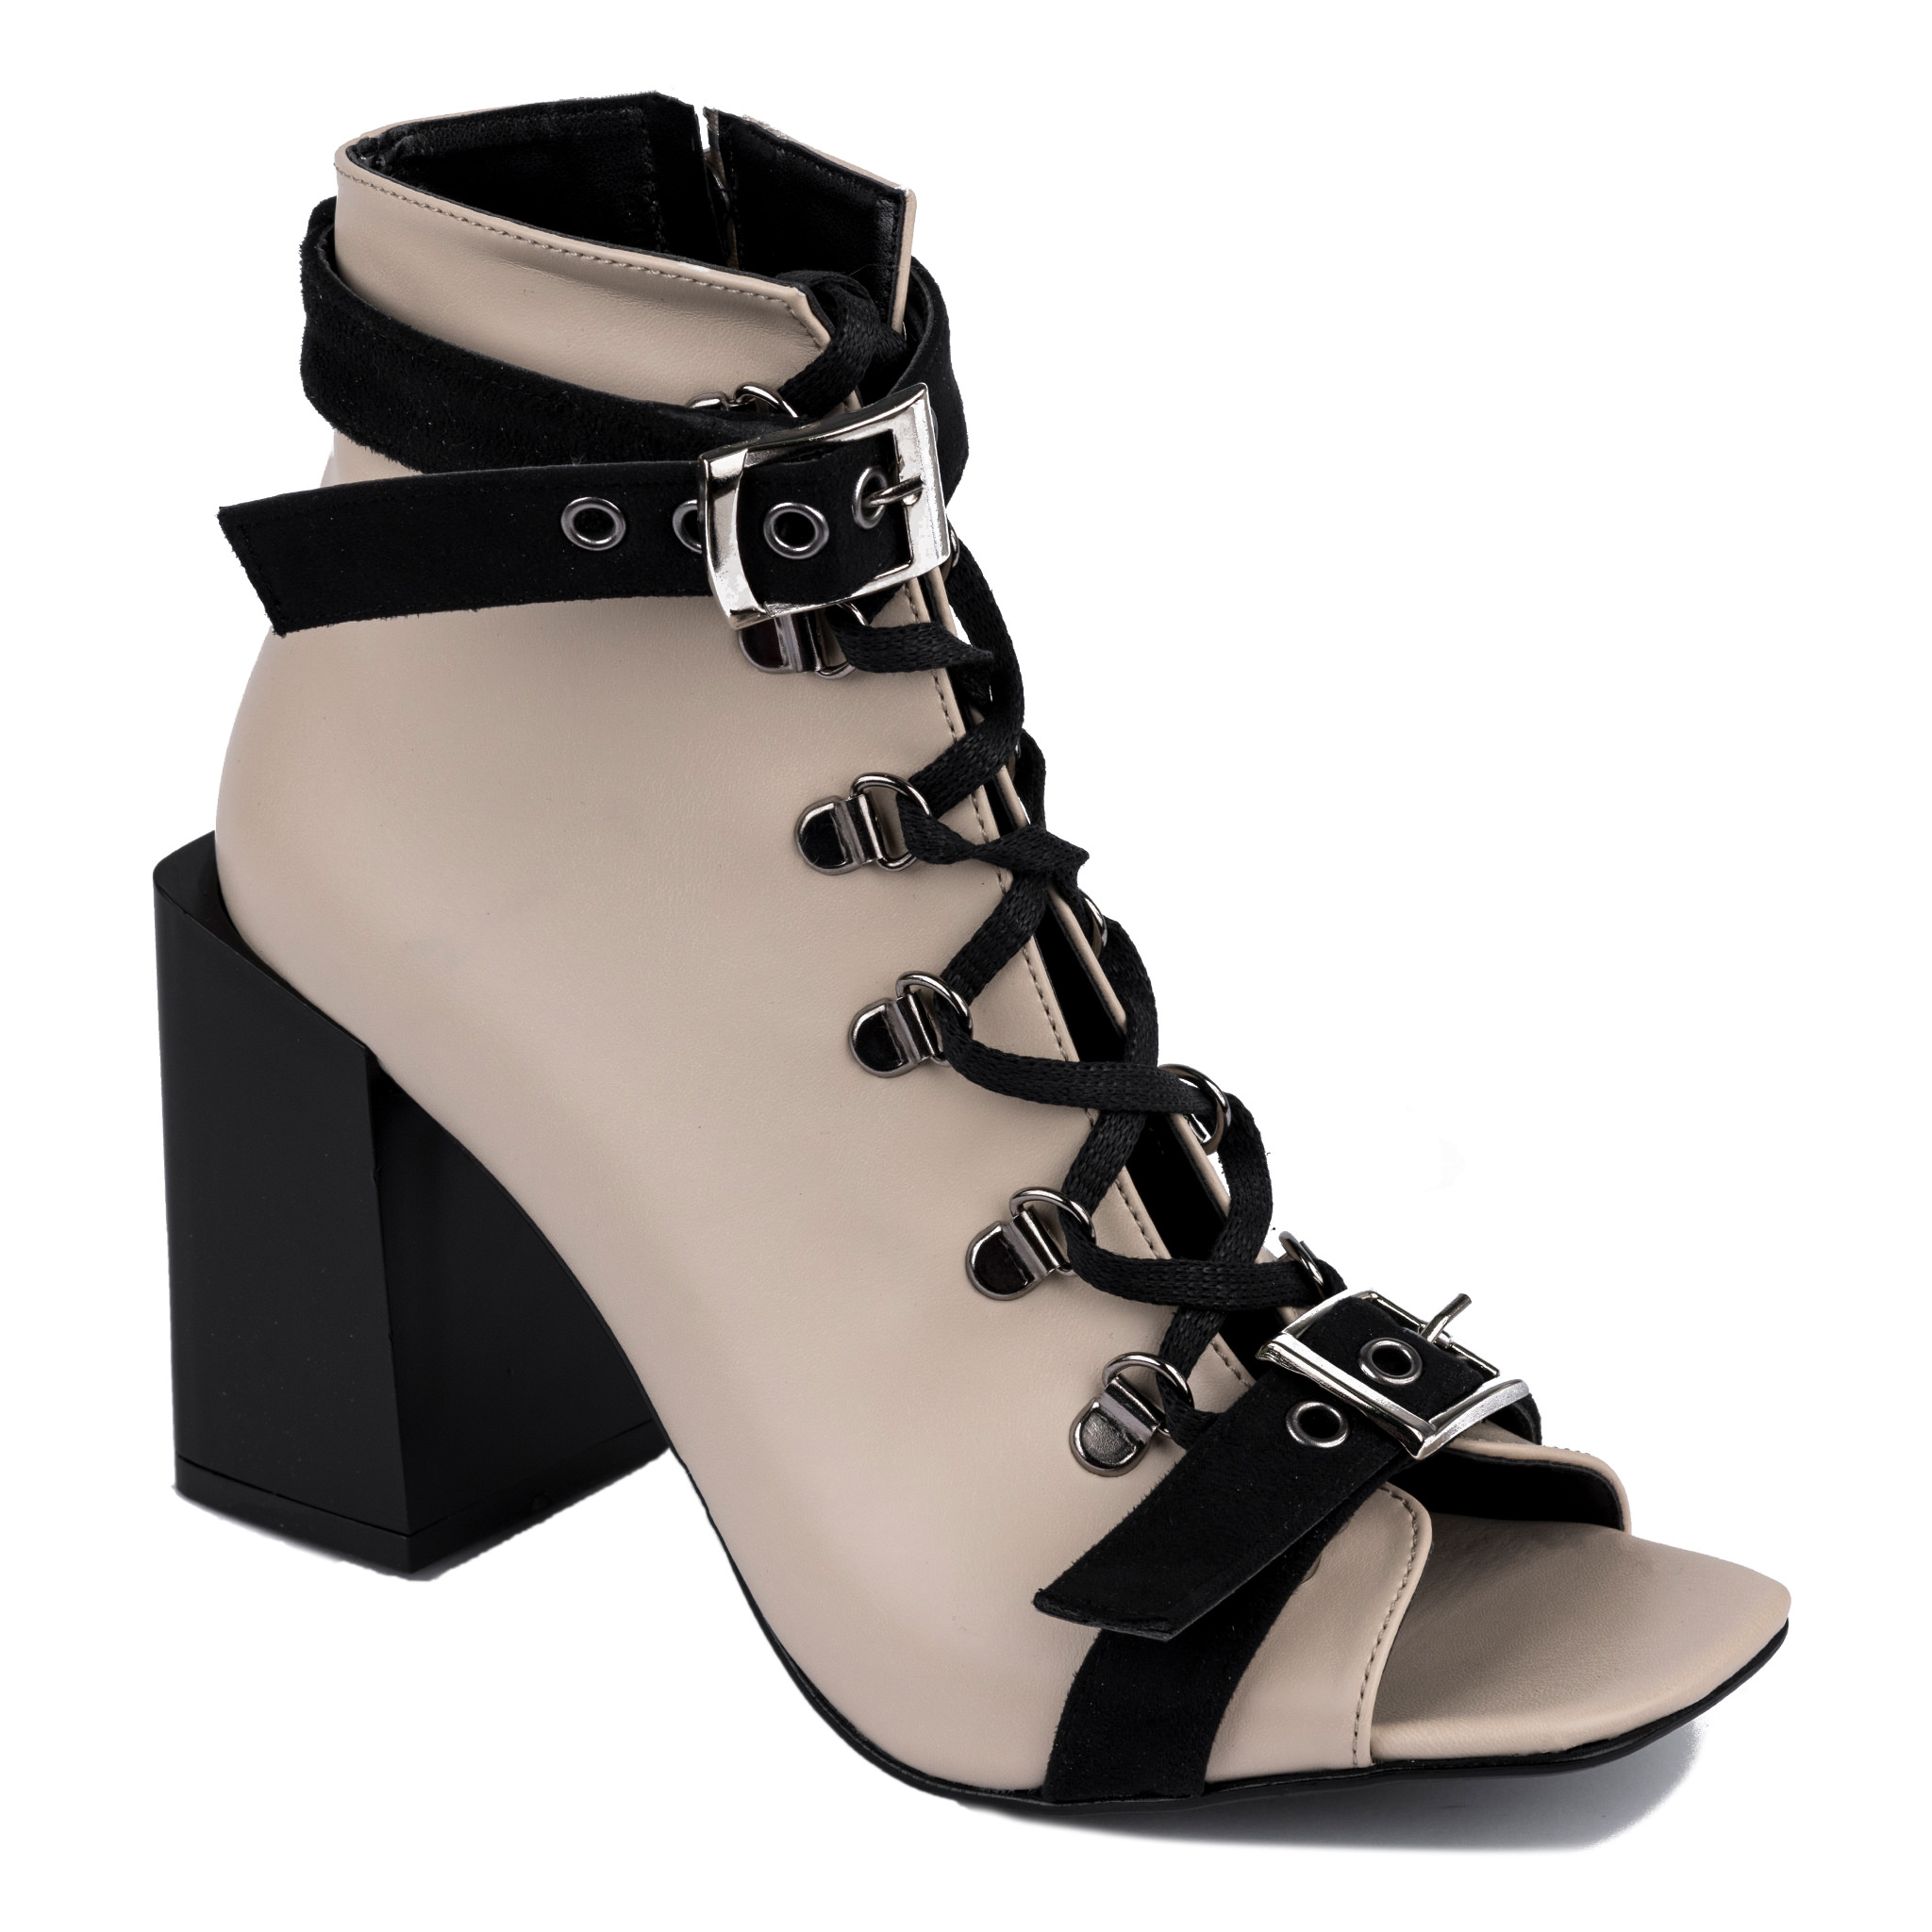 PEEP TOE ANKLE BOOTS WITH BELTS AND BLOCK HEEL - BEIGE